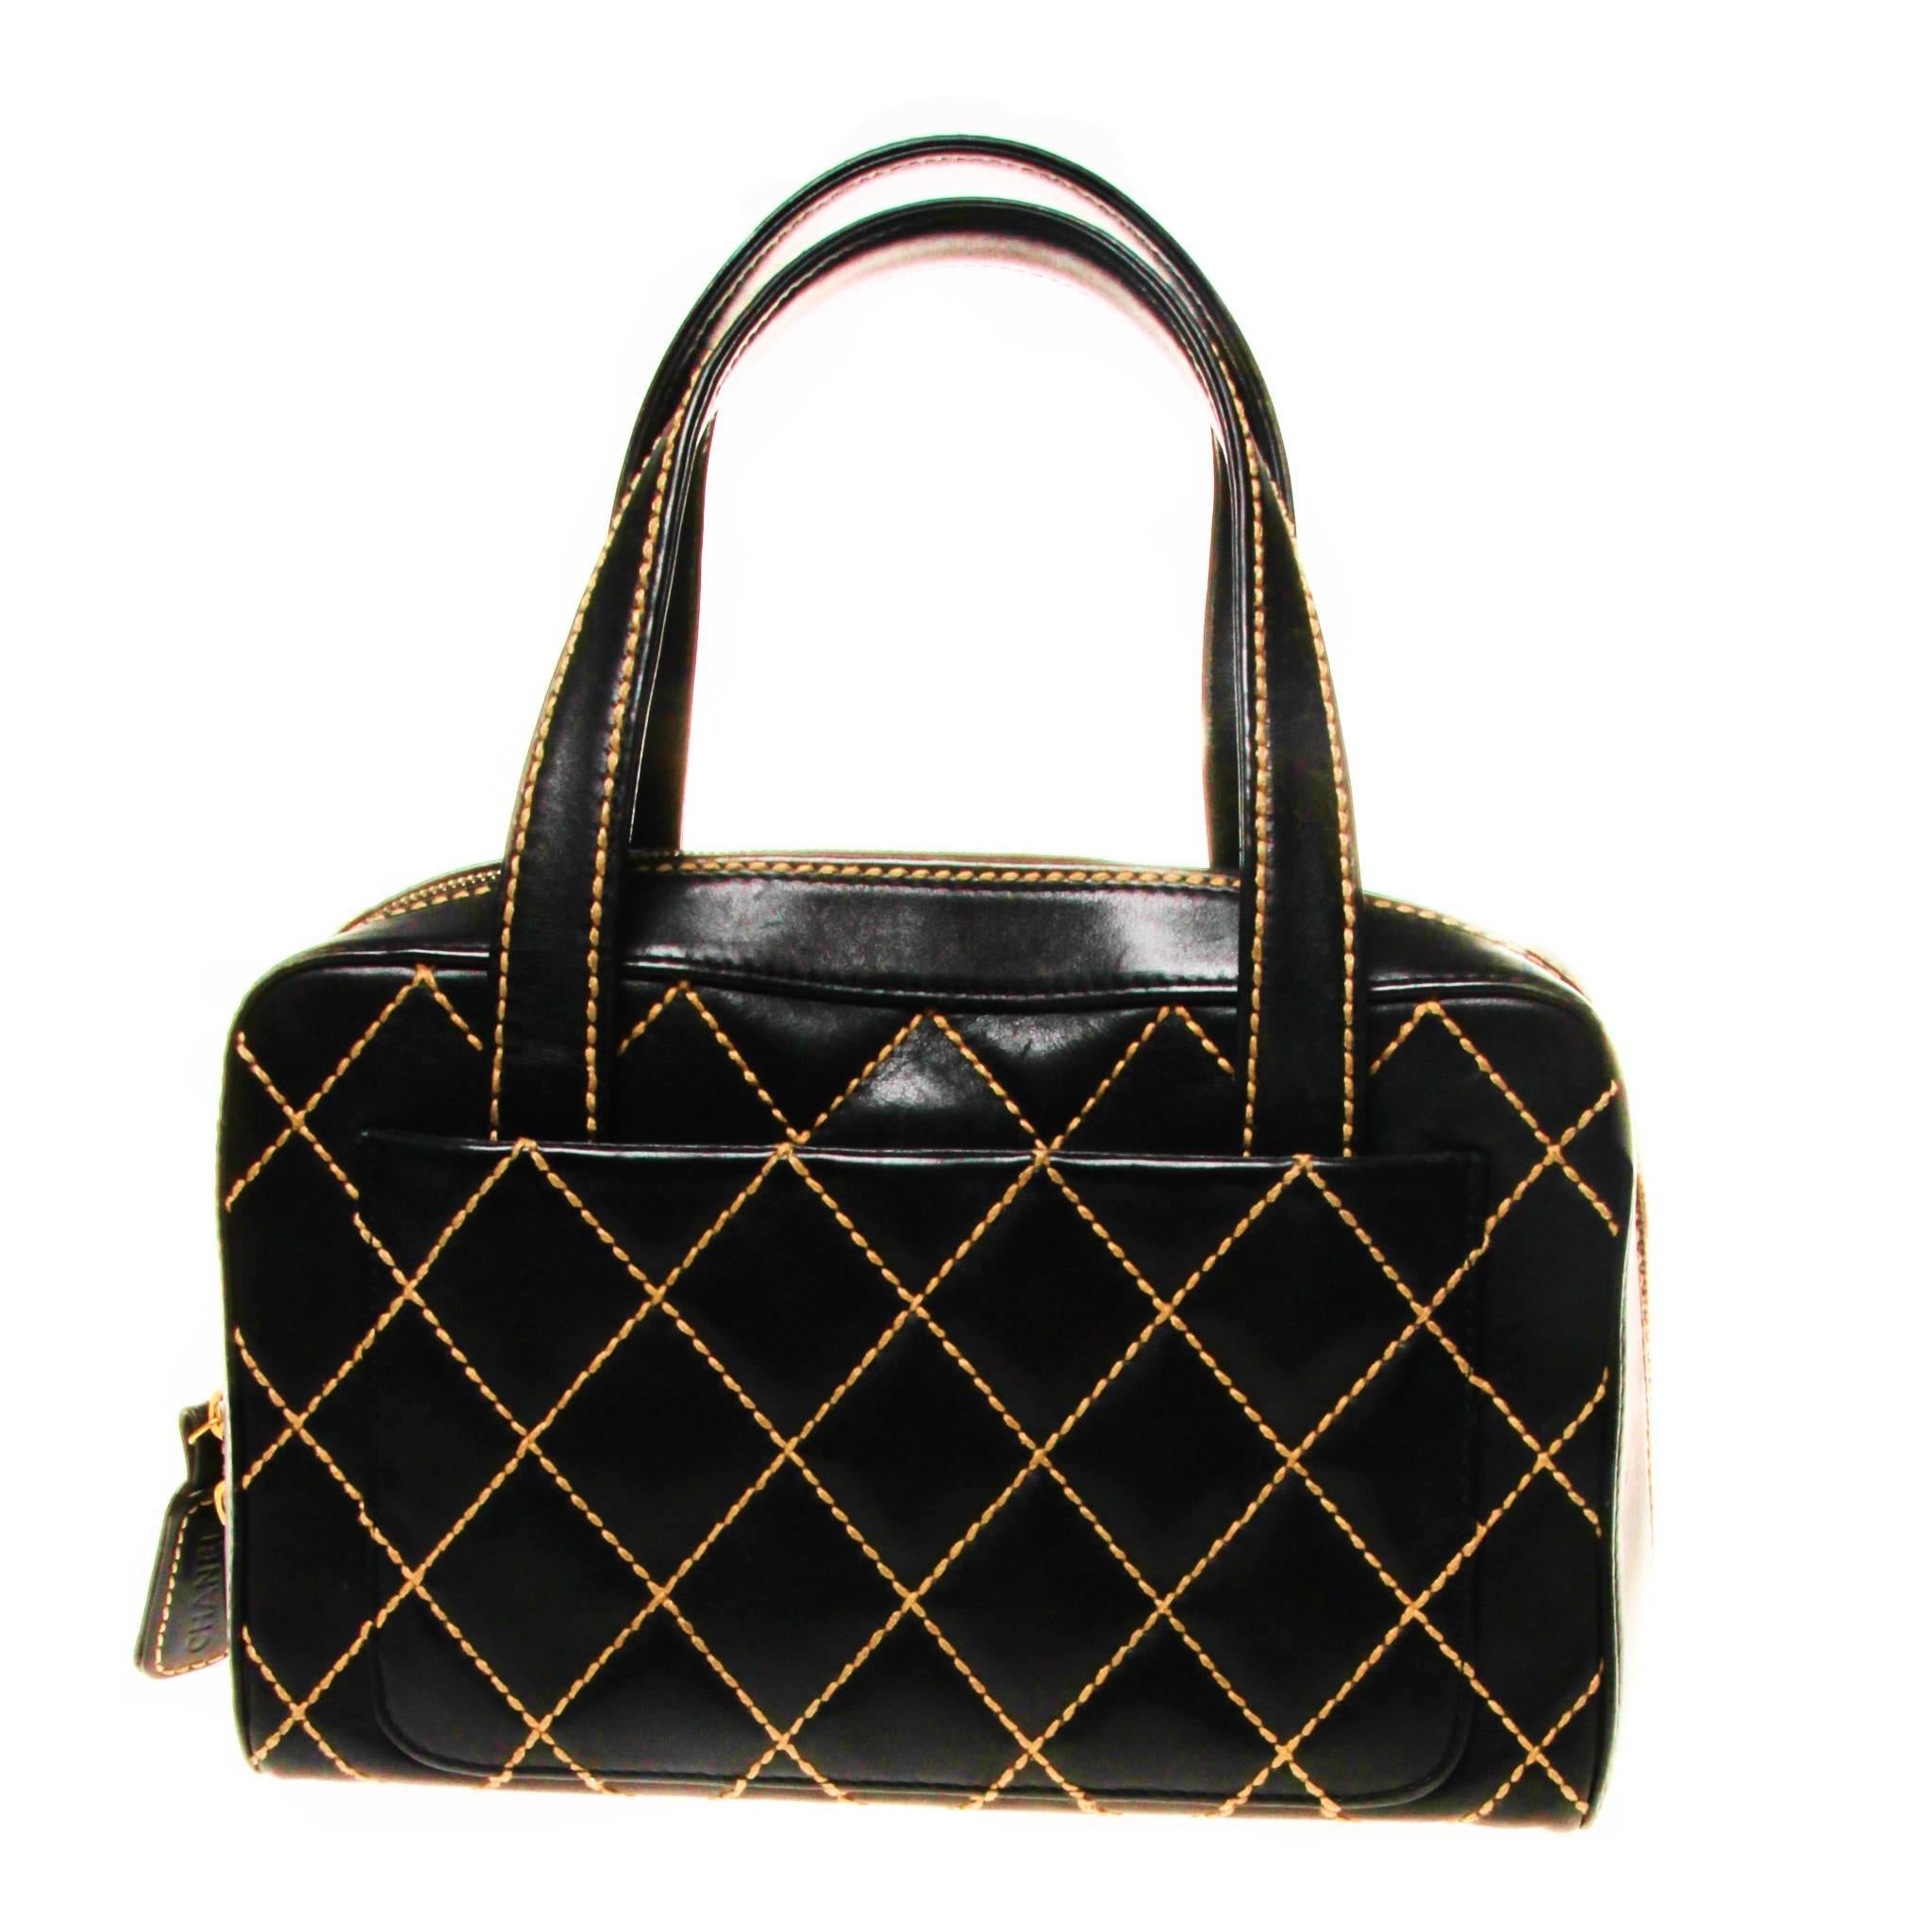 This bag has a classic, structured bowler shape crafted of luxurious black calfskin leather with a bold white stitched diamond quilt.

It features smooth black leather outer edges, strap top handles and a gold Chanel CC on the front top edge. The